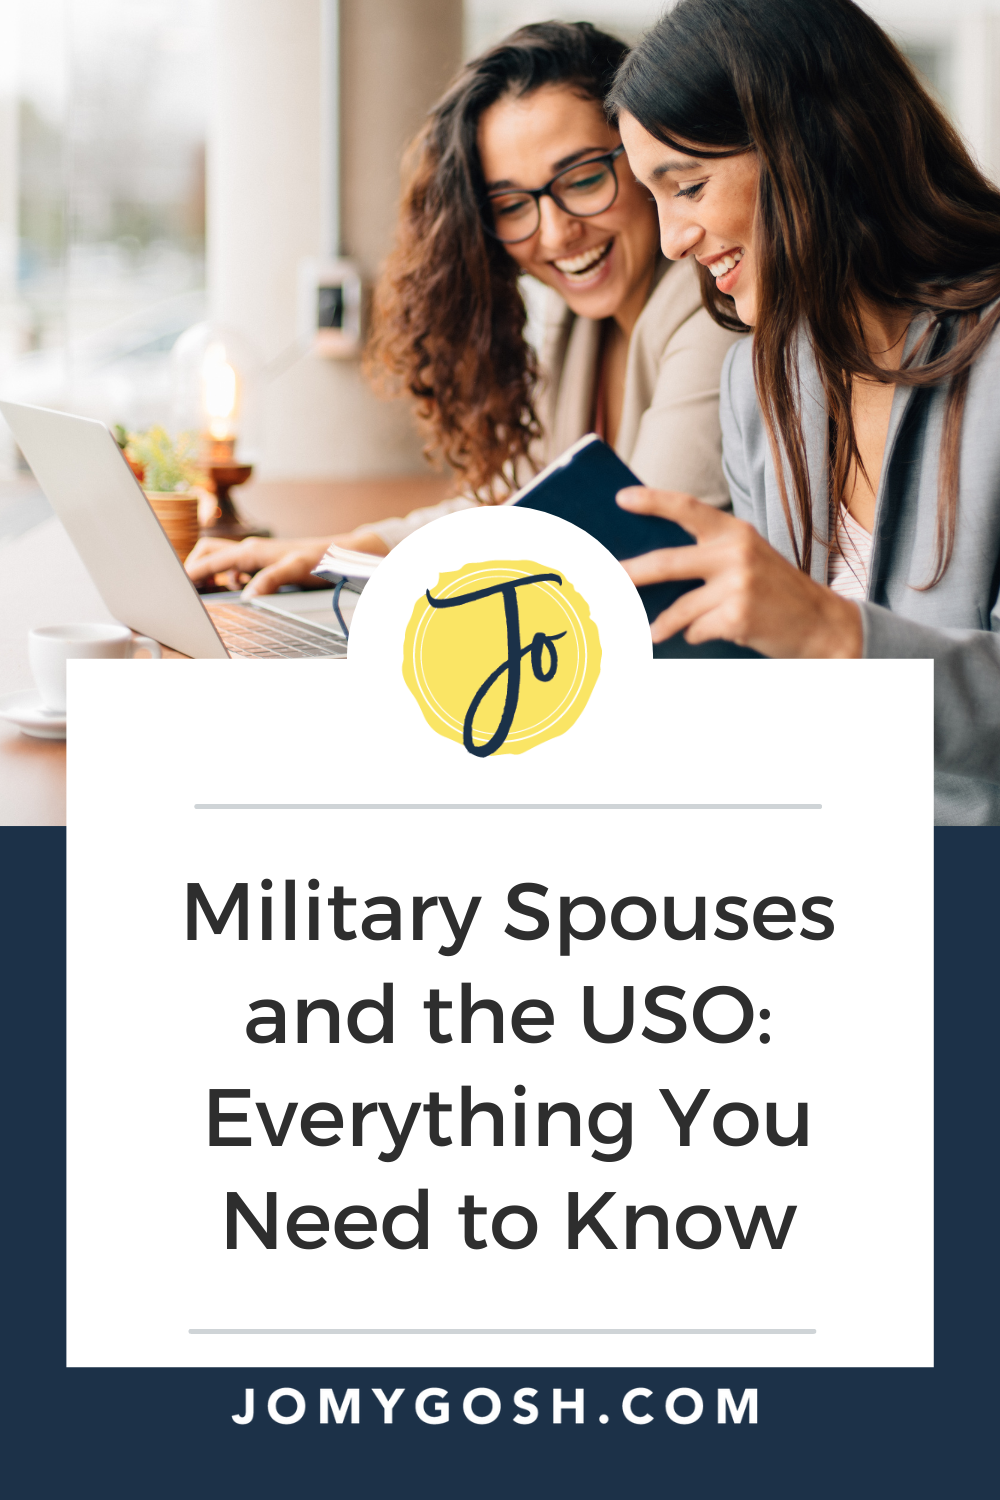 Use these free programs from the USO to make life a little easier as a military spouse.